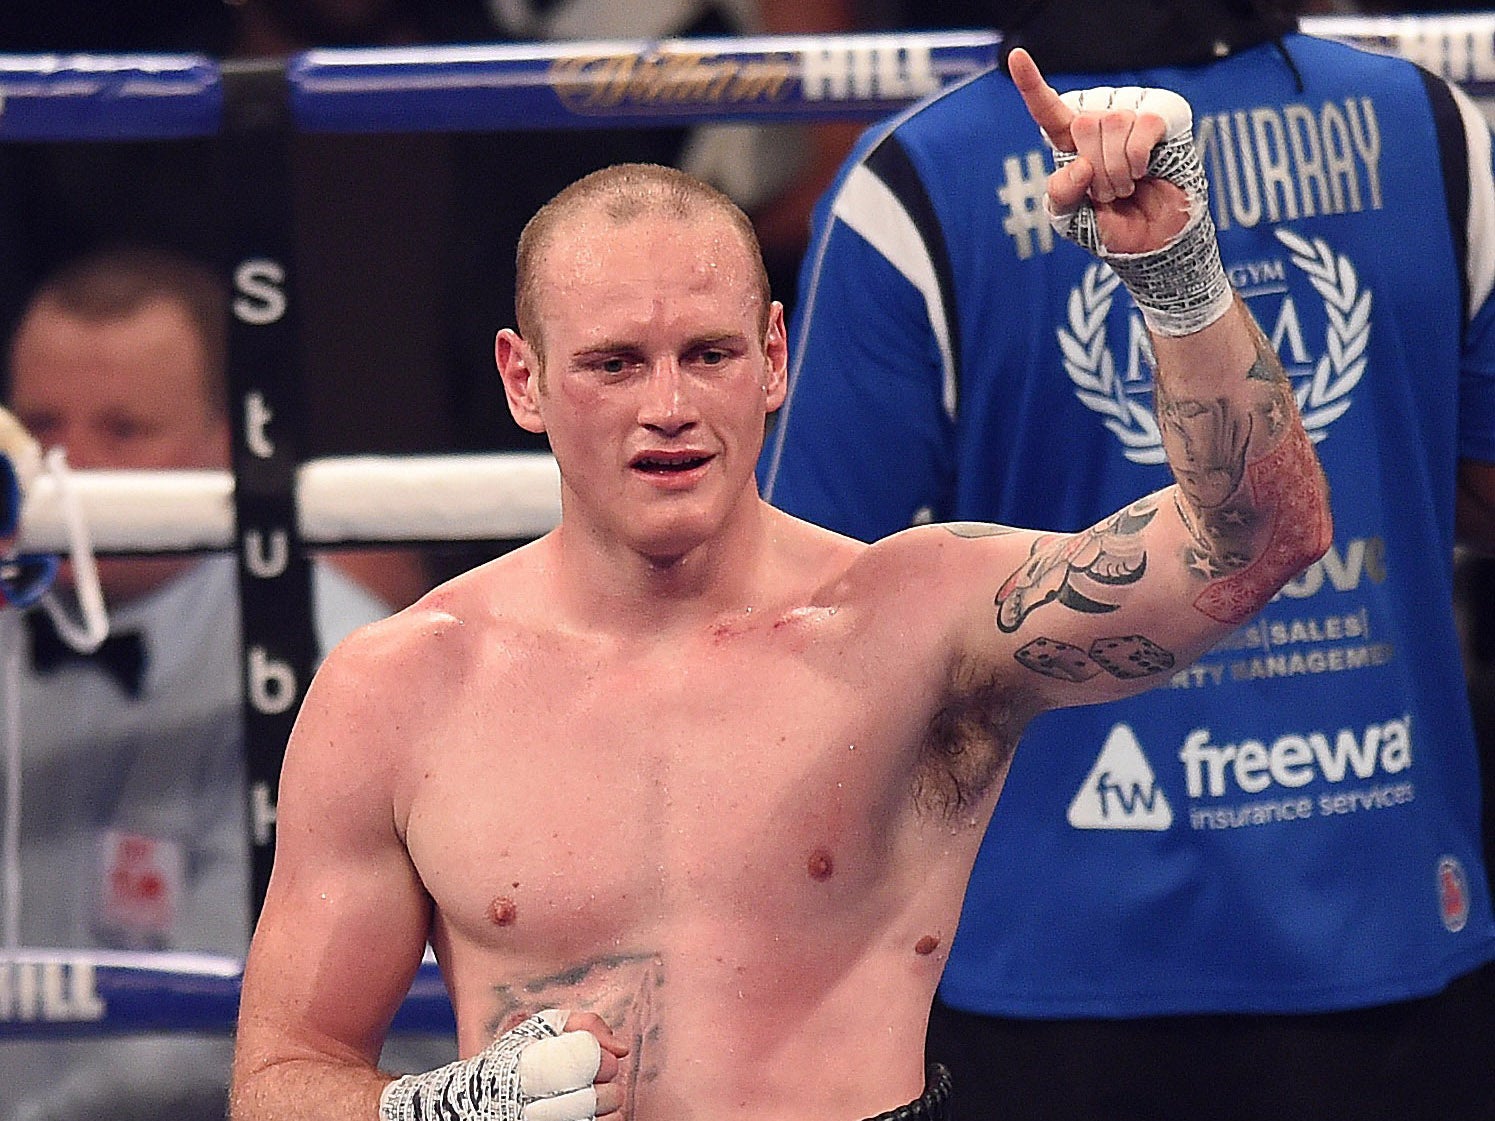 Groves will look to win his first world title at the fourth attempt on 27th May